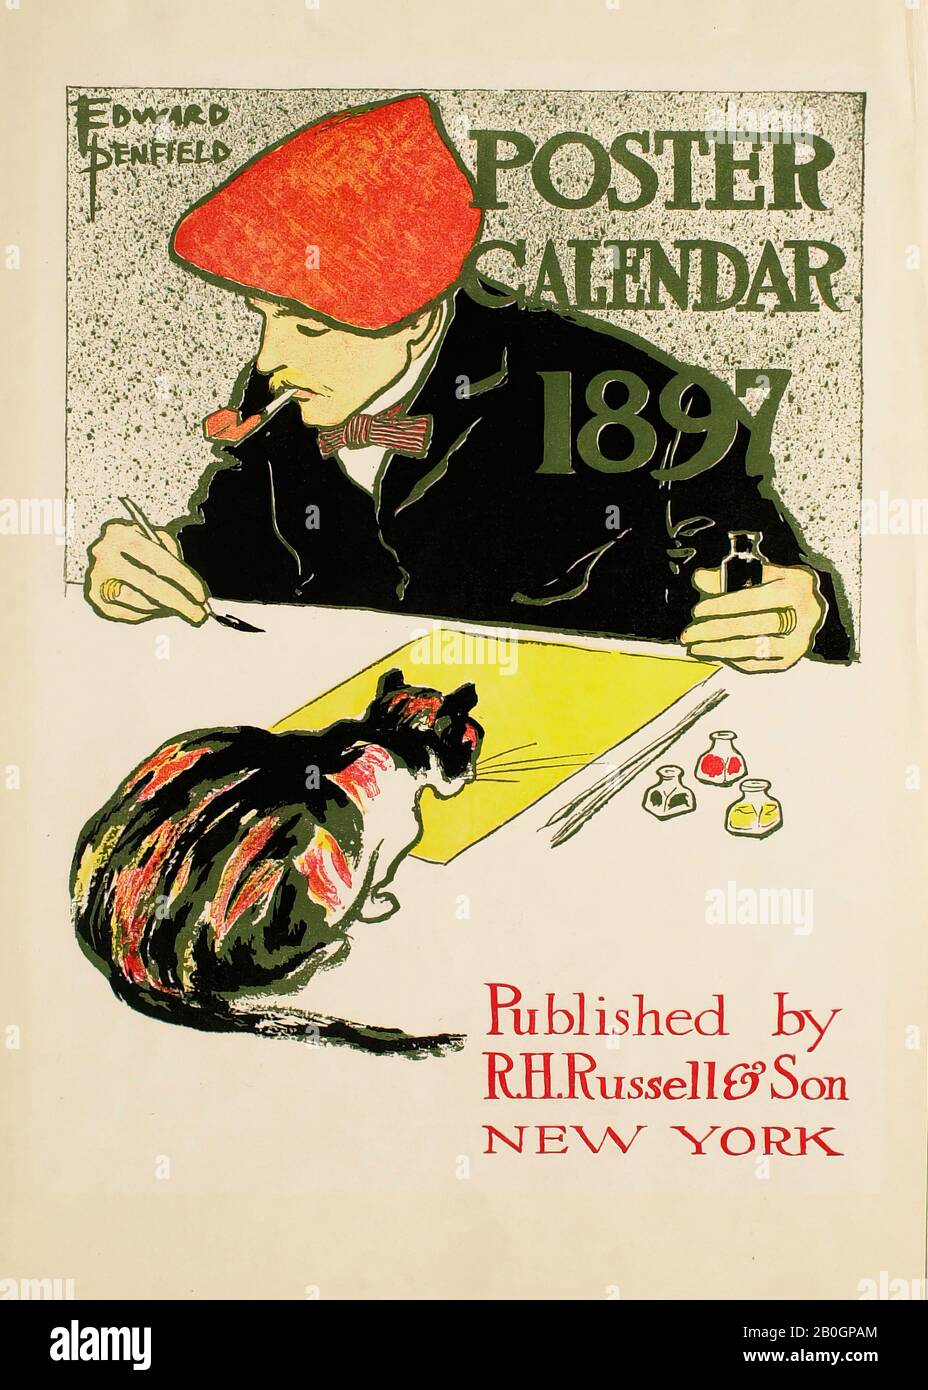 Edward Penfield, American, 1866-1925, Poster Calendar 1897, R. H. Russel & Son, Publisher, 1897, Zincograph on paper, sheet: 17 1/8 x 12 in. (43.5 x 30.5 cm Stock Photo